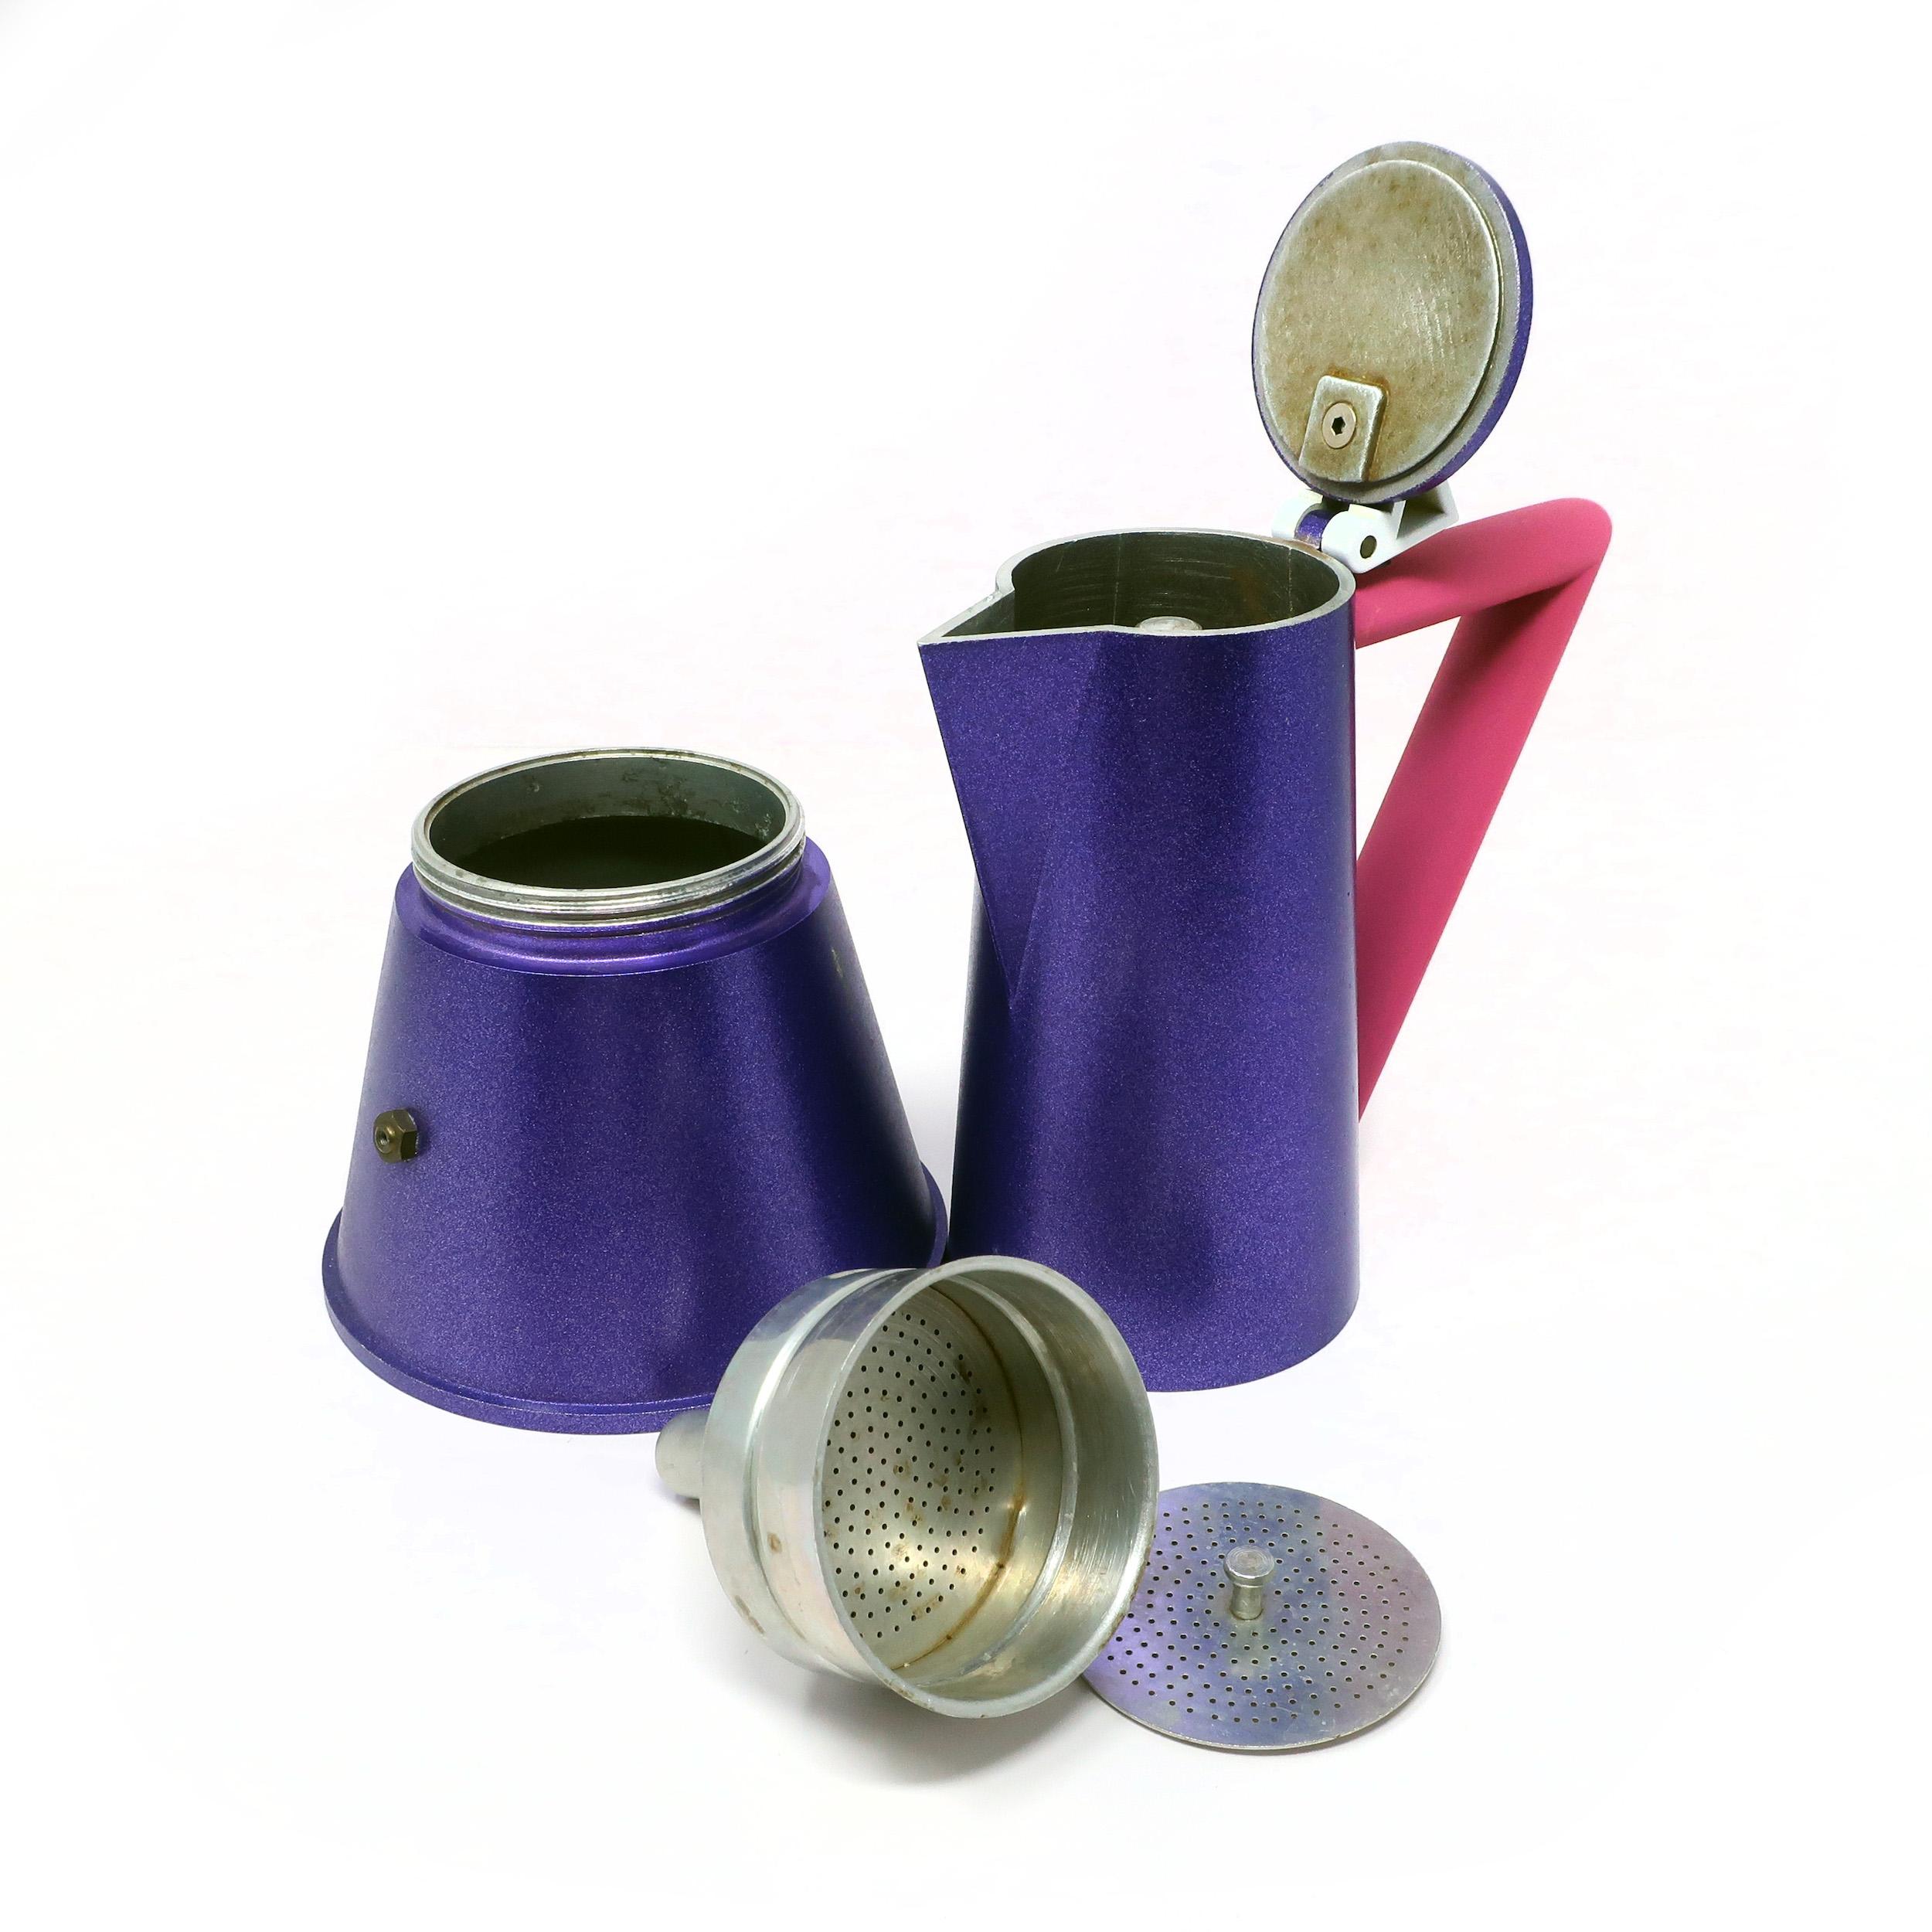 20th Century Postmodern Pink and Purple Espresso Pot by Ettore Sottsass for Lagostina